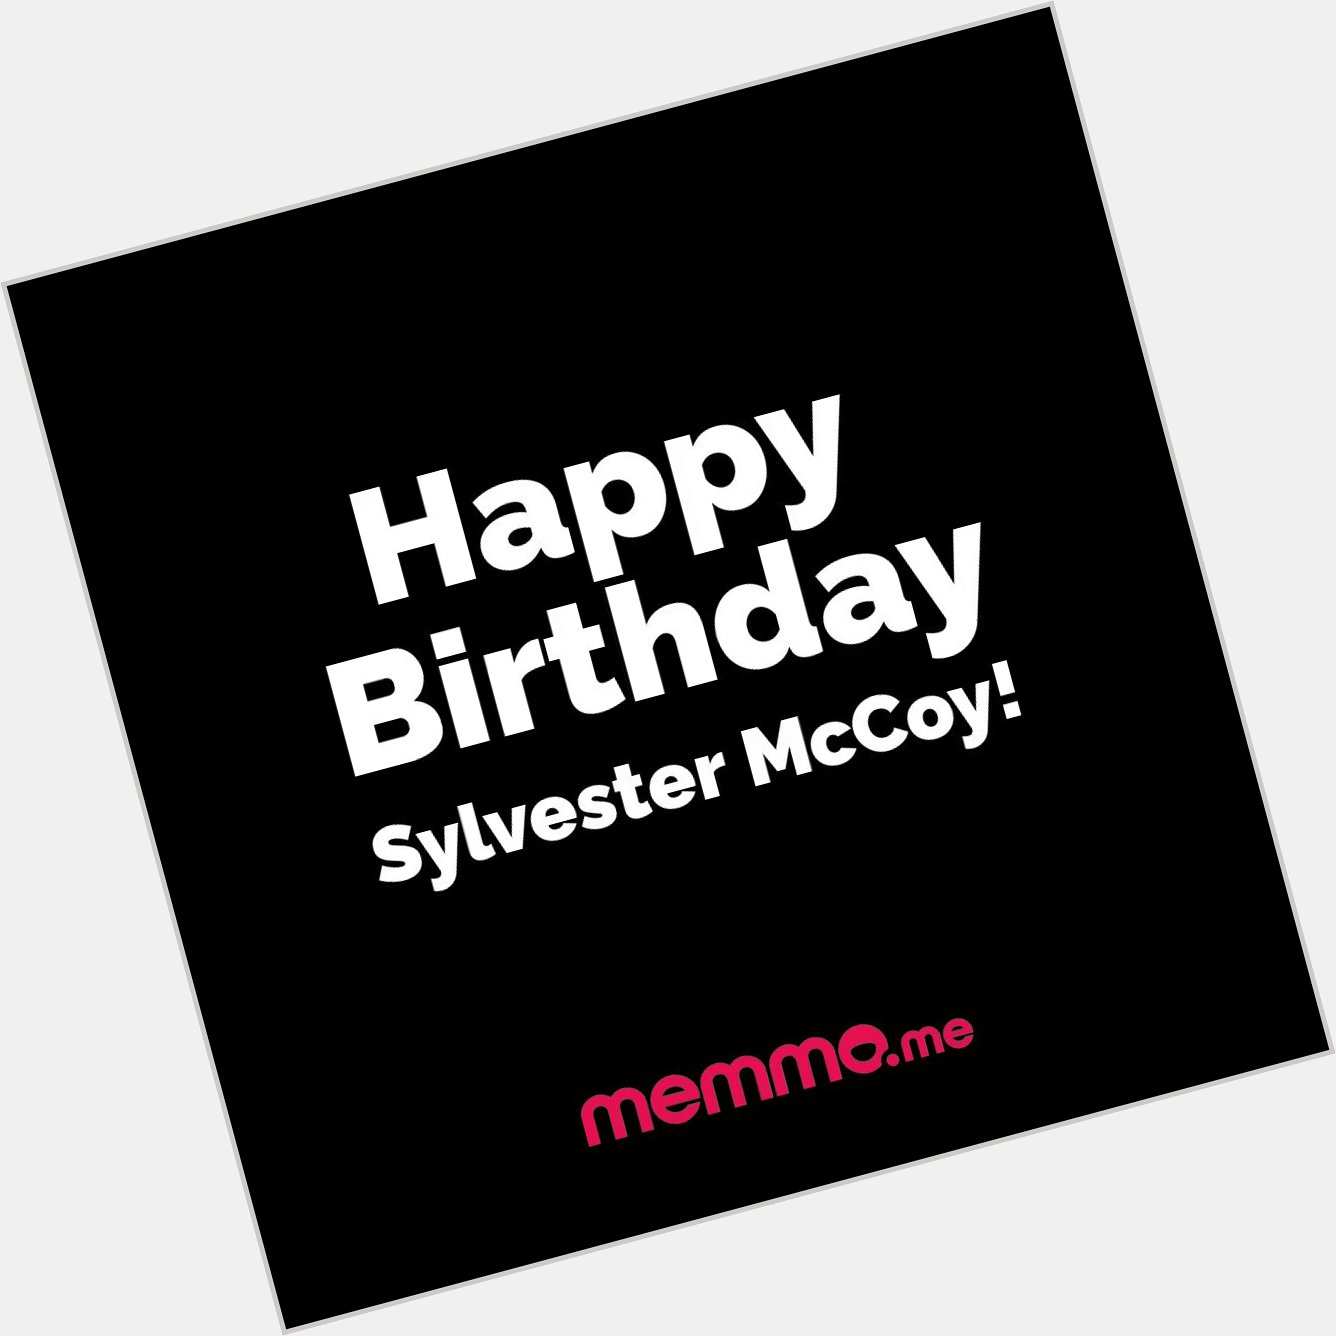 The biggest happy birthday wish from us to Sylvester McCoy!    